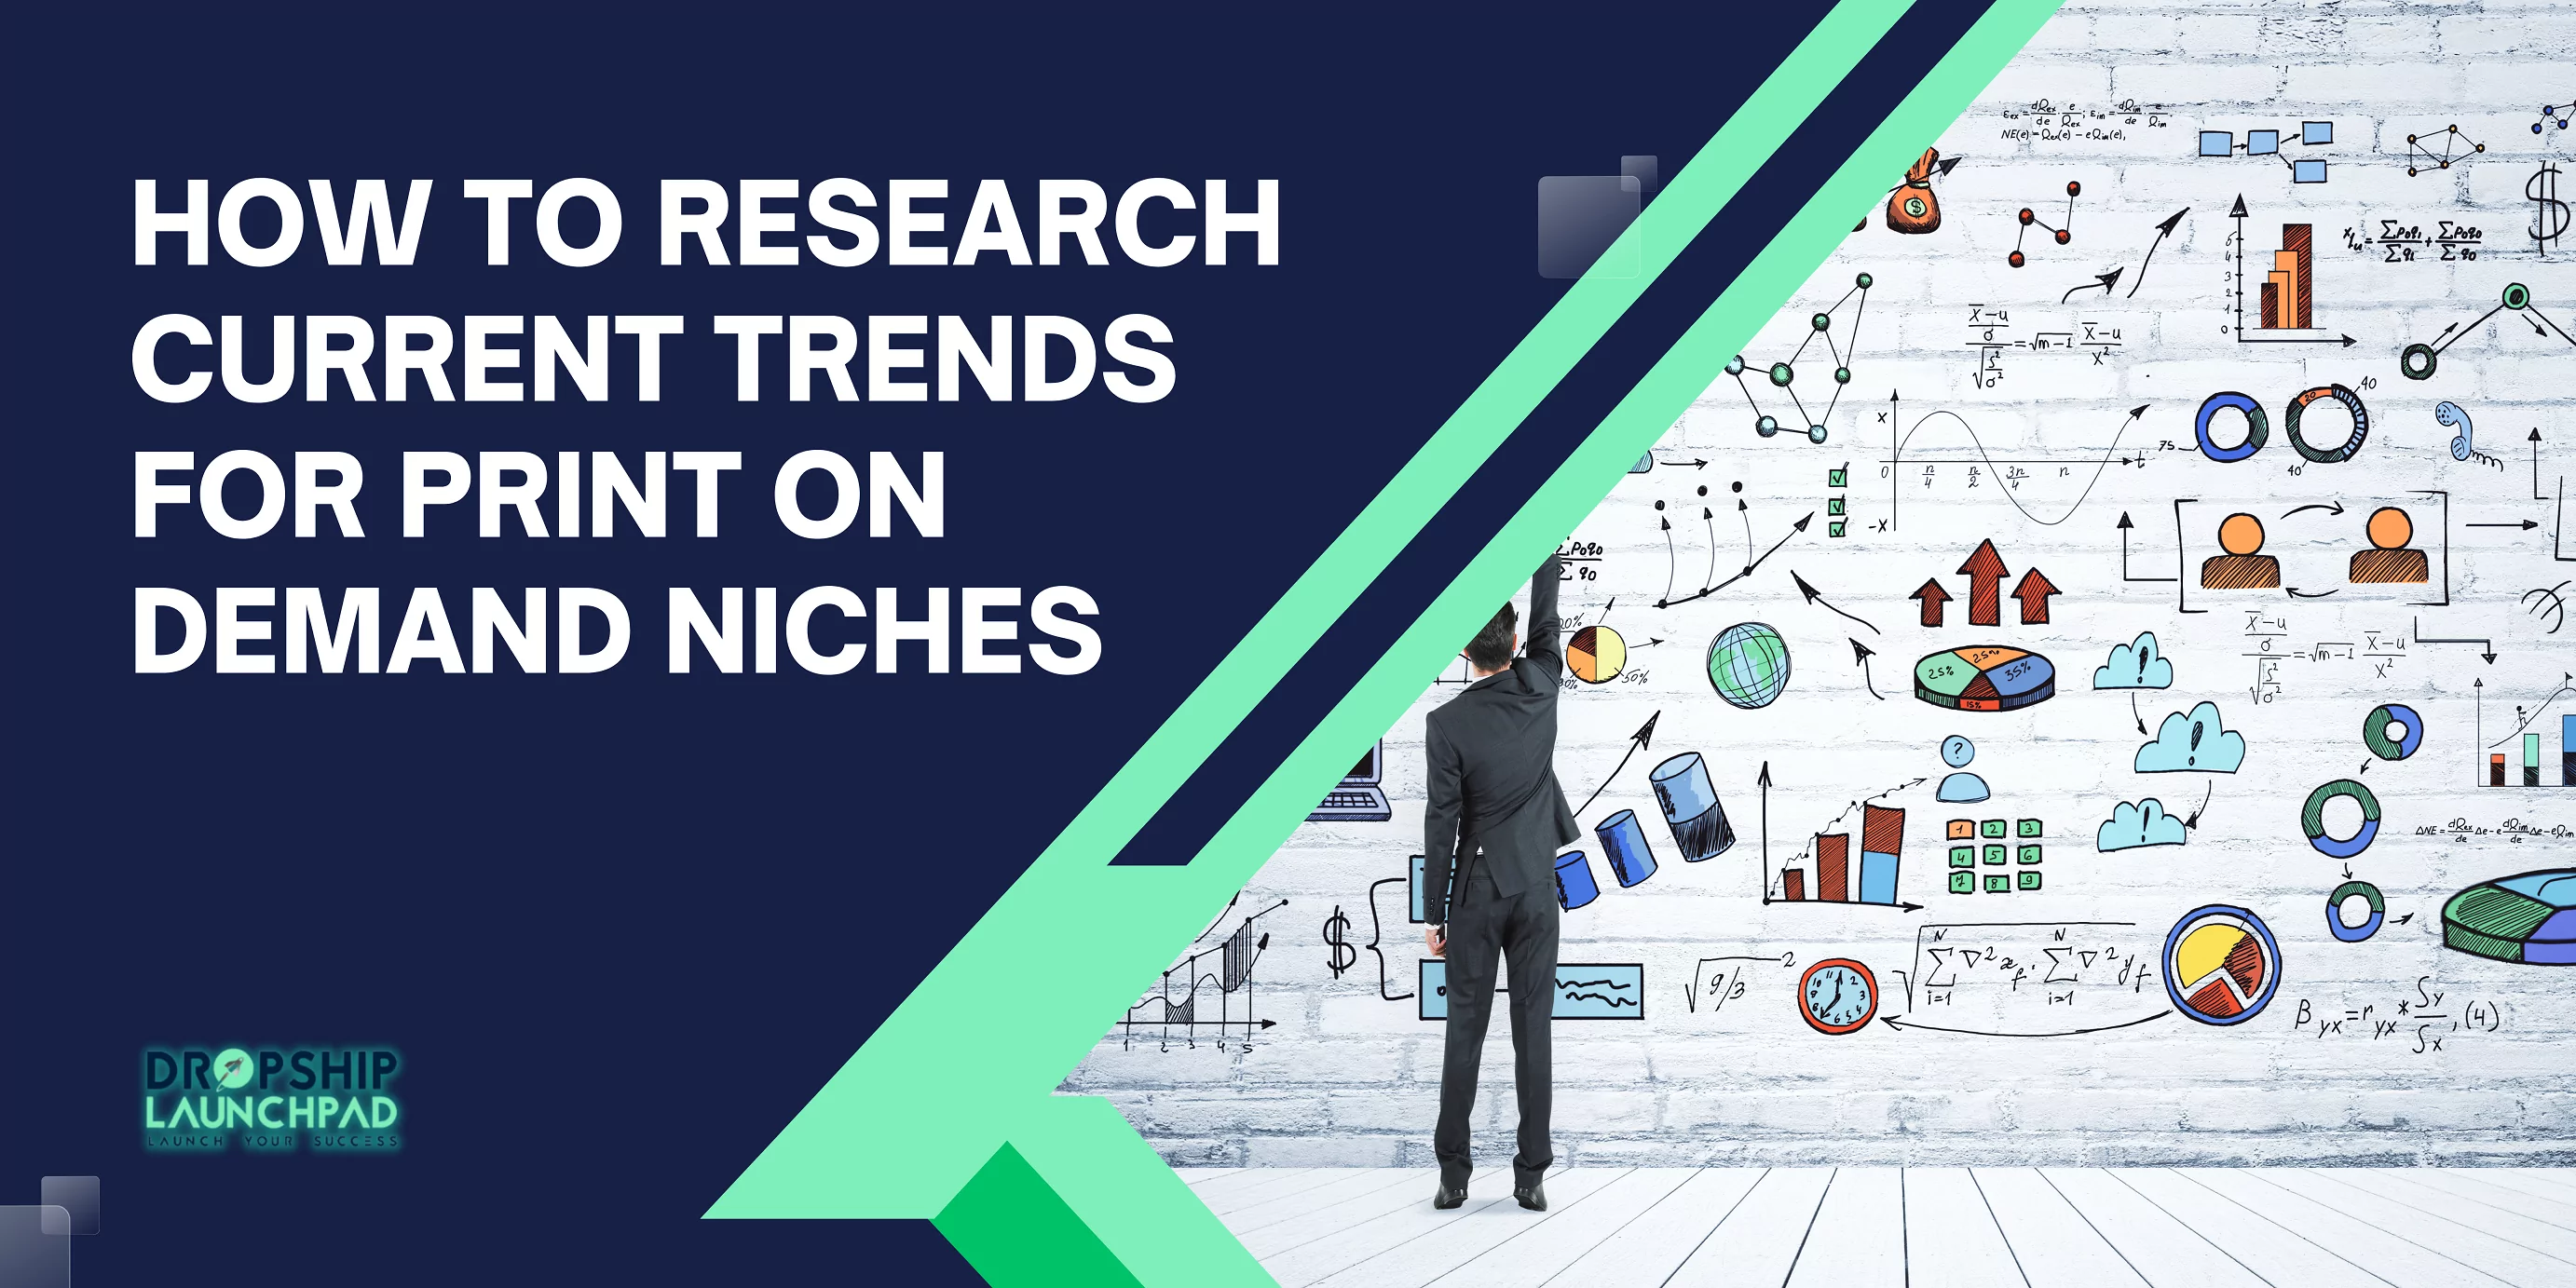 How to Research Current Trends for print on demand niches